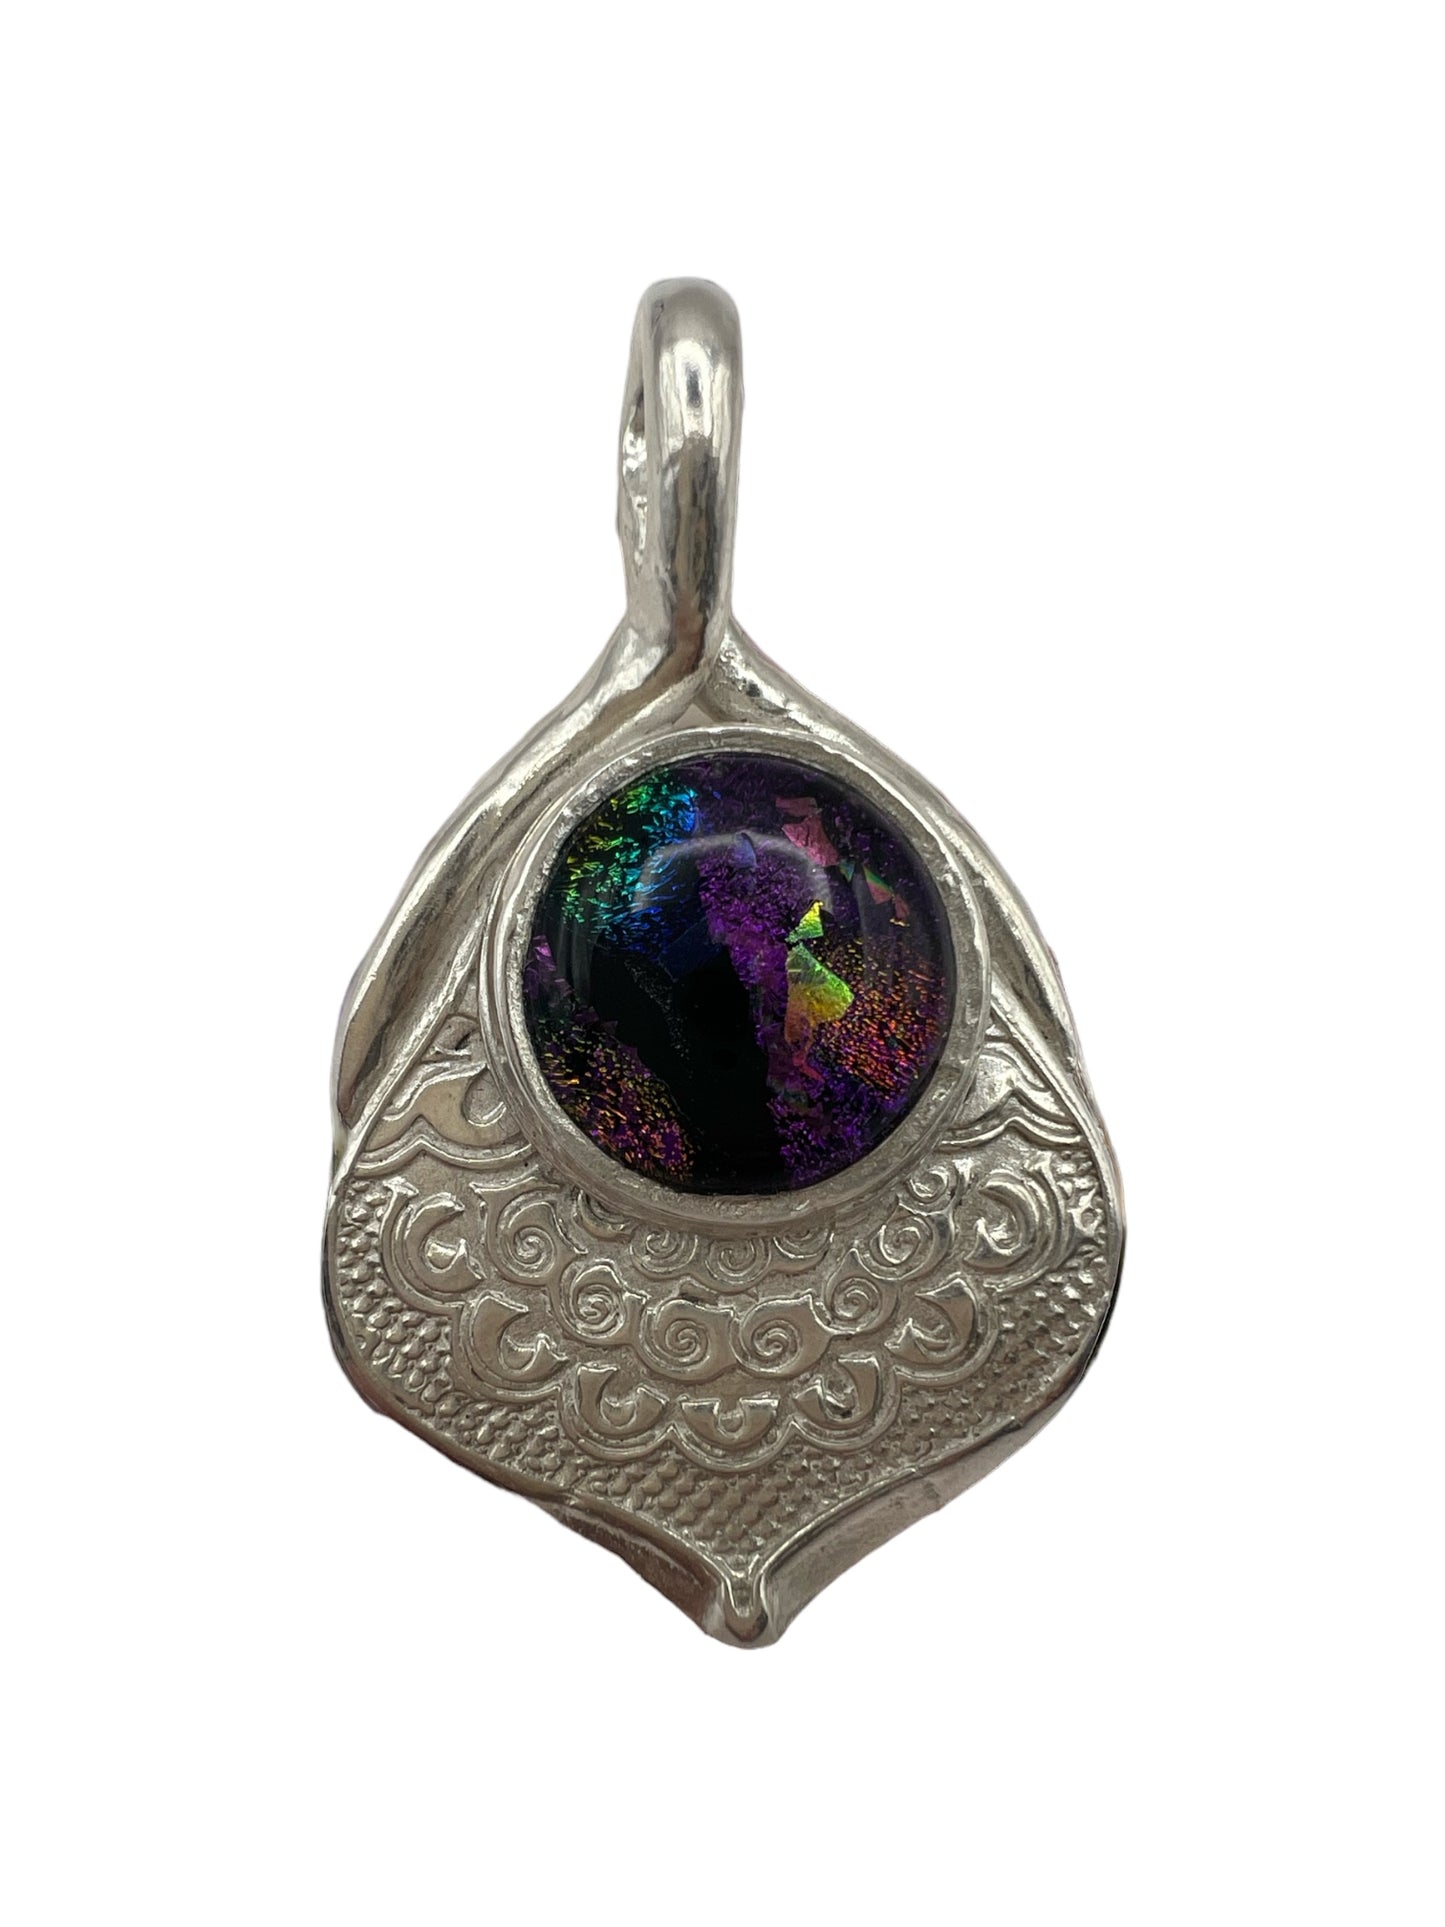 Basket with Large Cabochon .999 Fine Silver Pendant